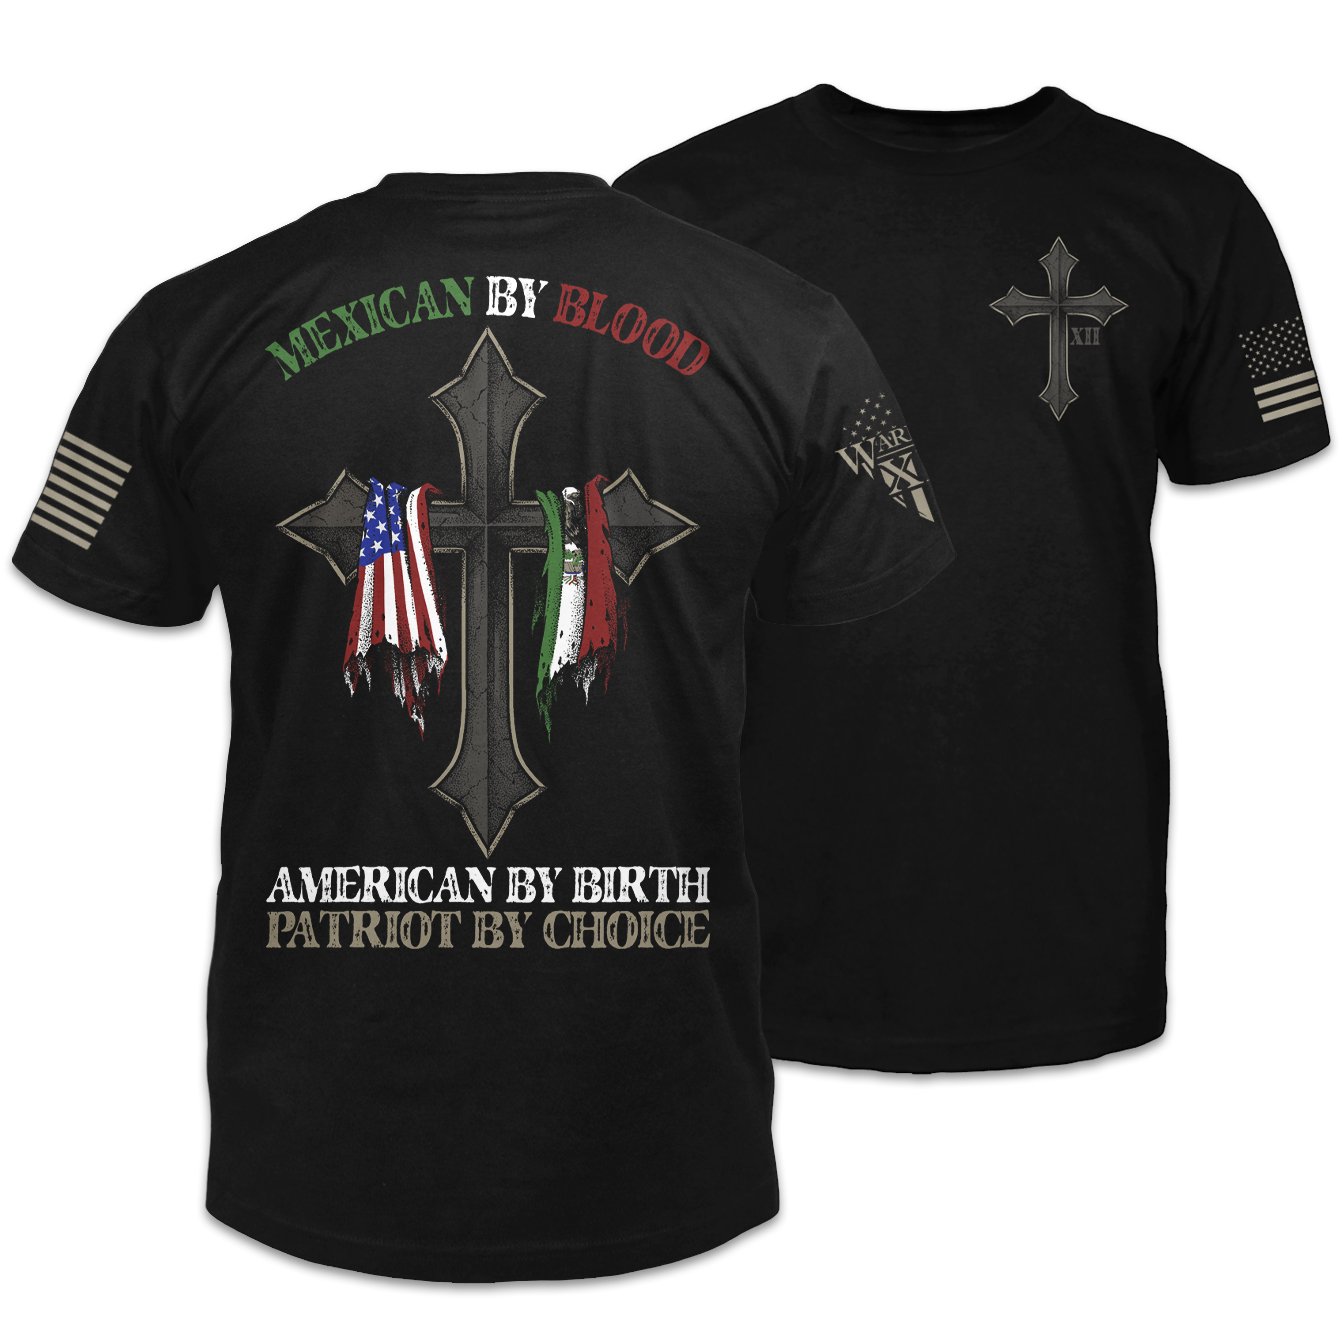 Mexican By Blood American By Birth Patriot By Choice 3d T Shirt